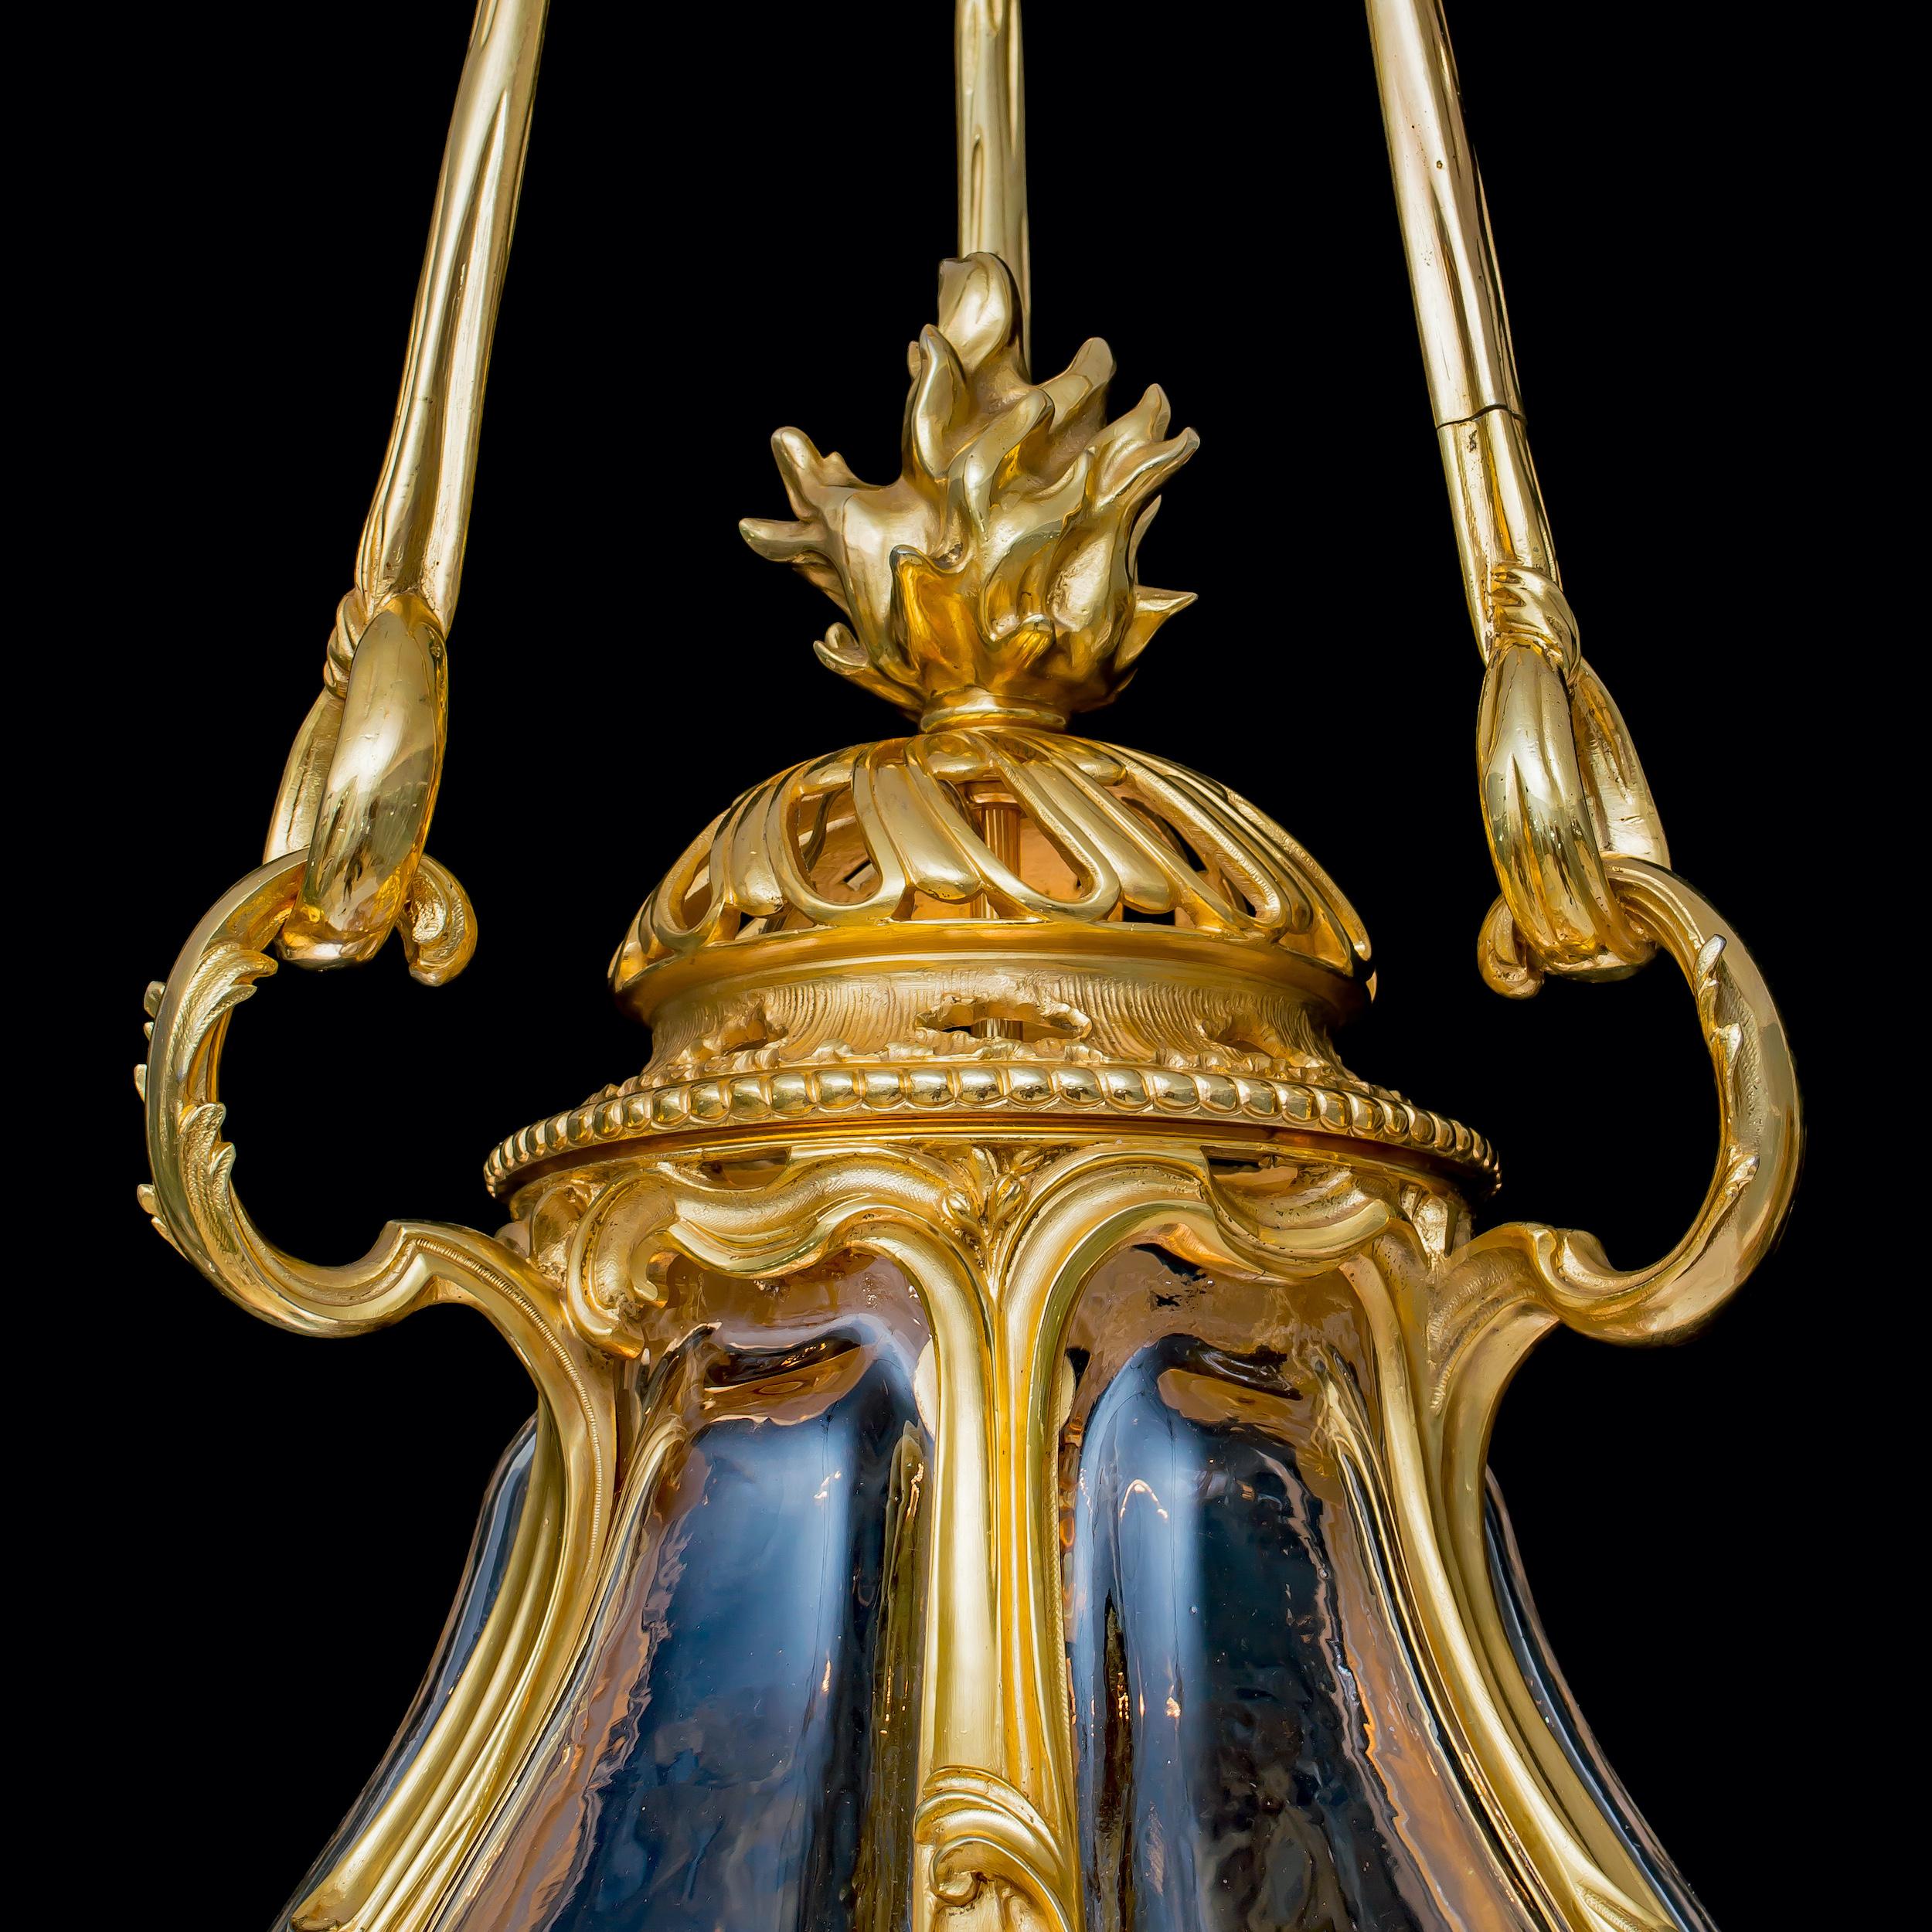 An Important Lantern
In the Louis XV Manner

Constructed in gilt bronze, the ovoid body composed of six blown crystal facets interspersed with ormolu acanthus-stylized scrolls, the lower and upper registers with openwork bronzework of Vitruvian